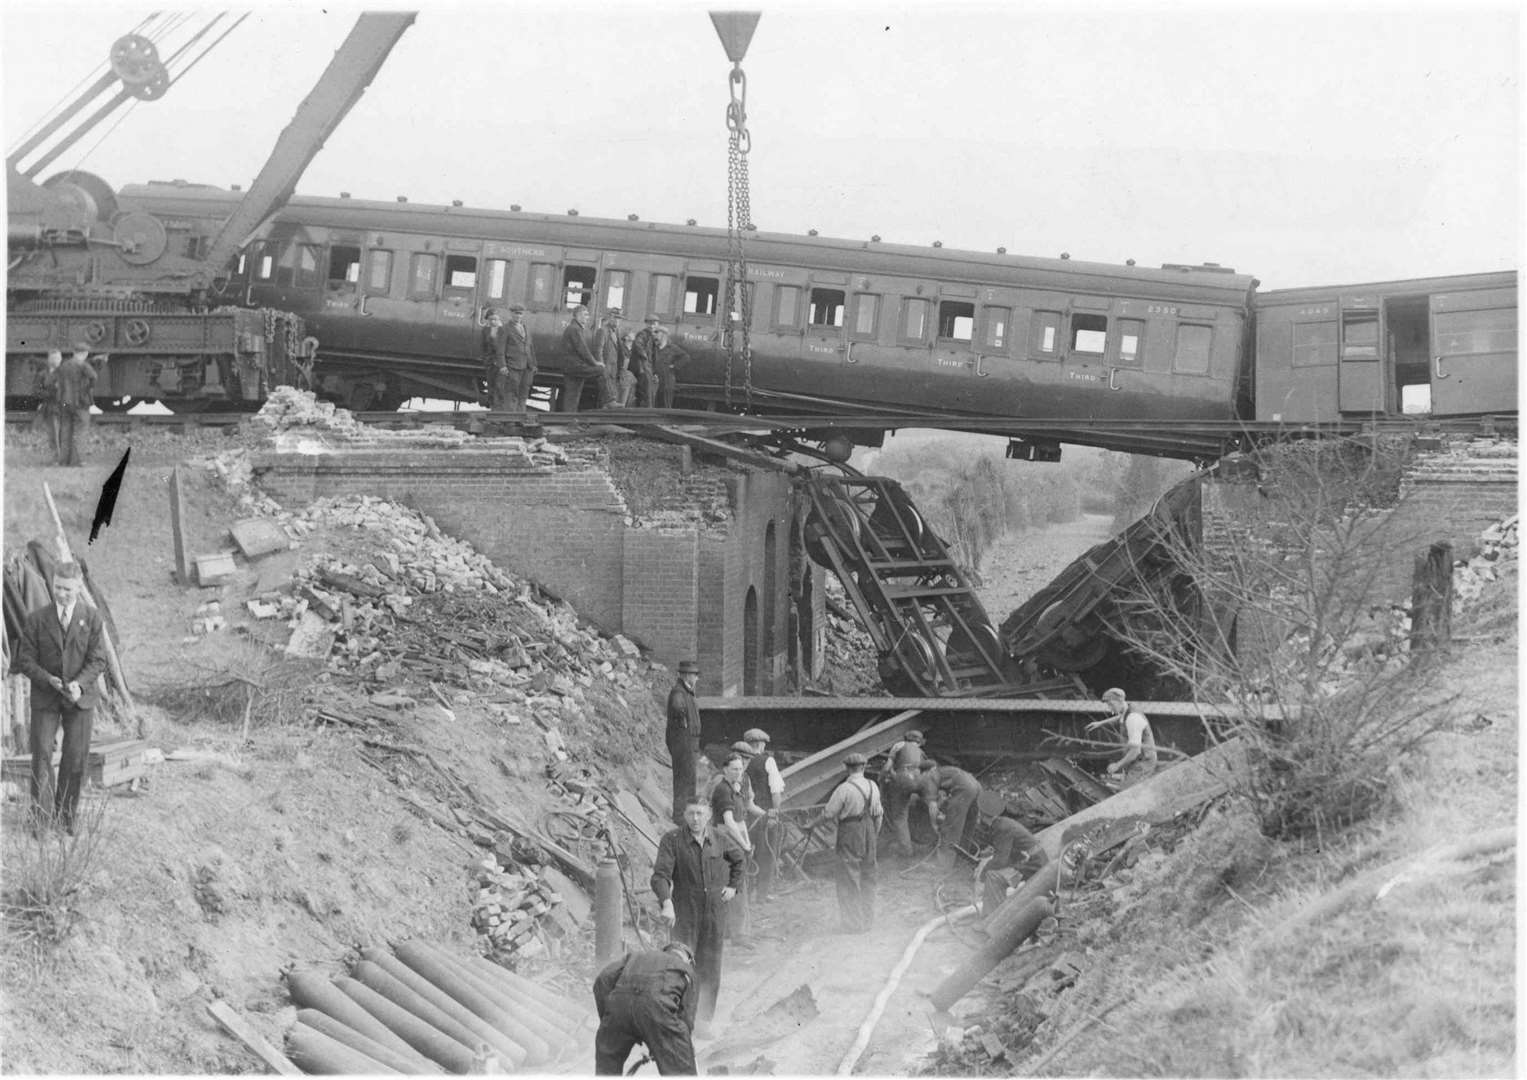 The train which crashed in Upchurch, just outside Rainham, in August 1944